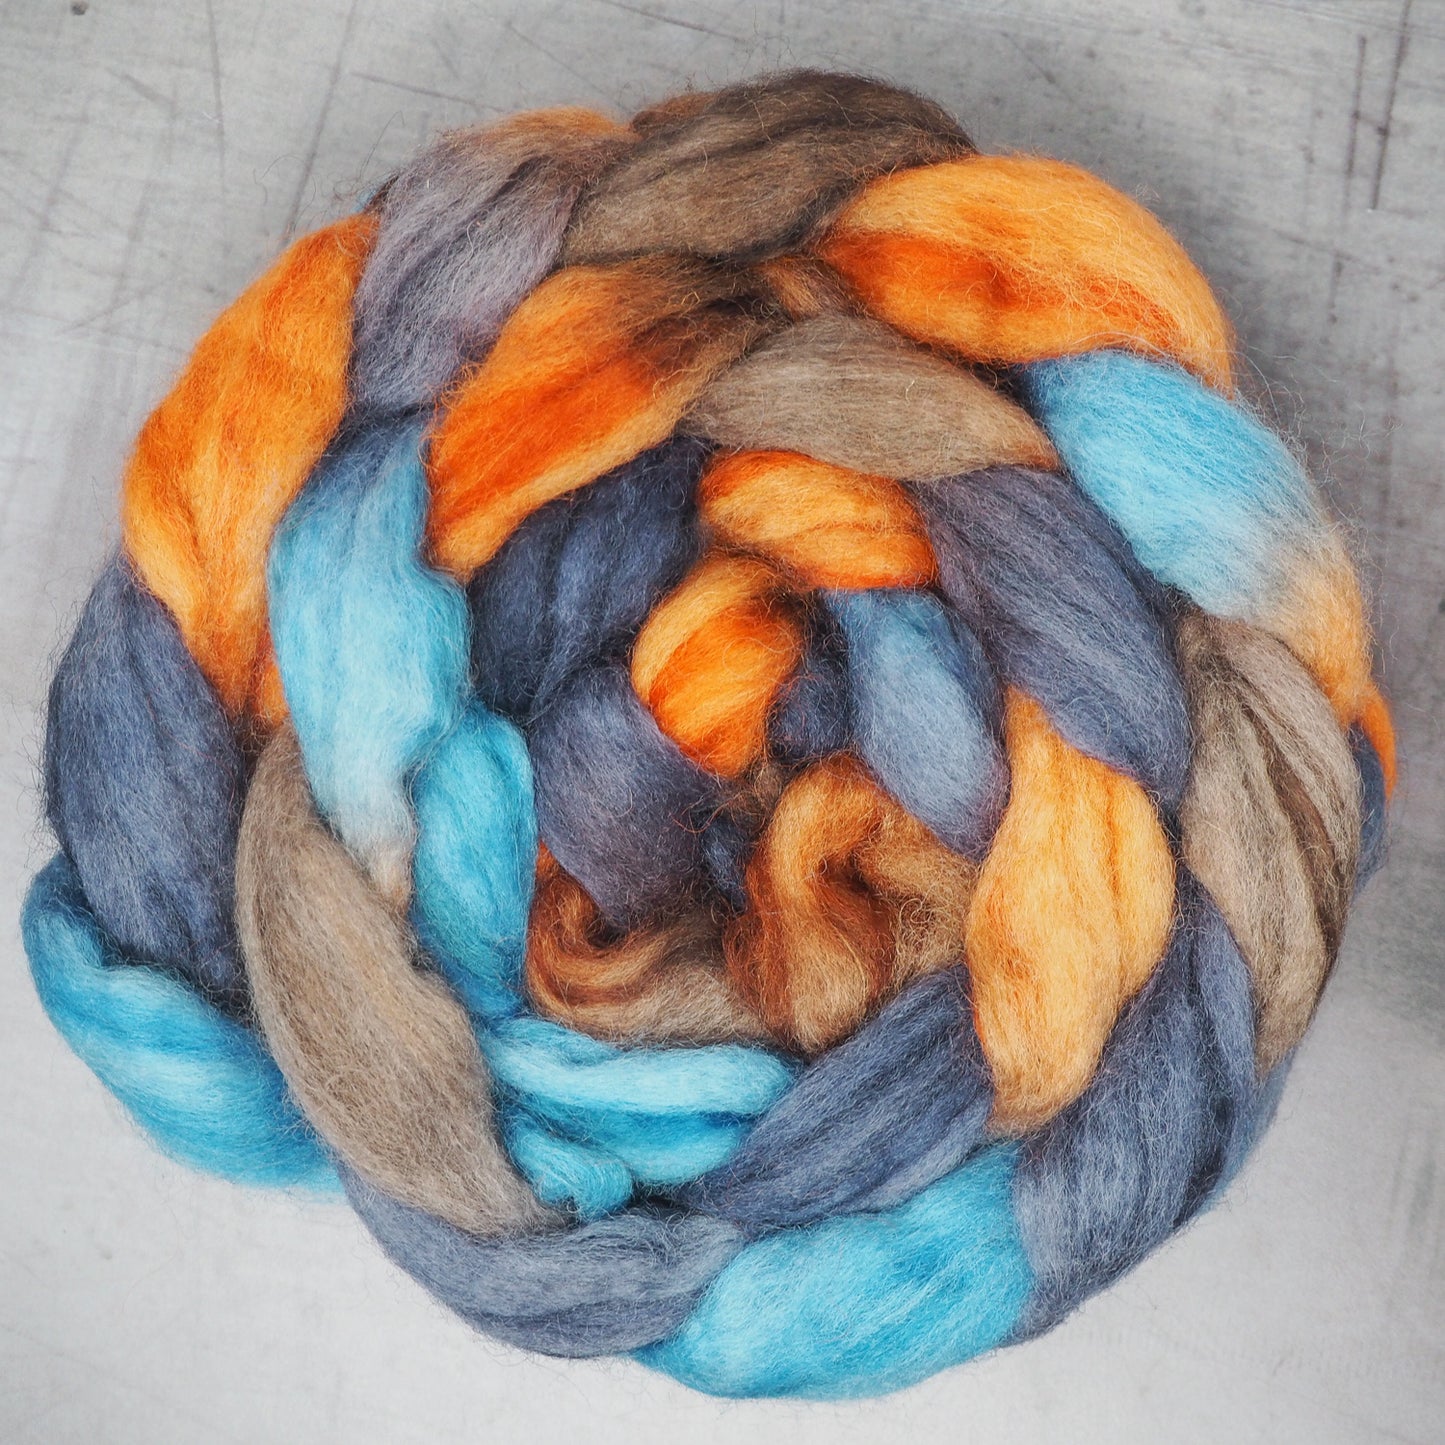 The World is Your Lobster - Exmoor Blueface/BFL/Wensleydale